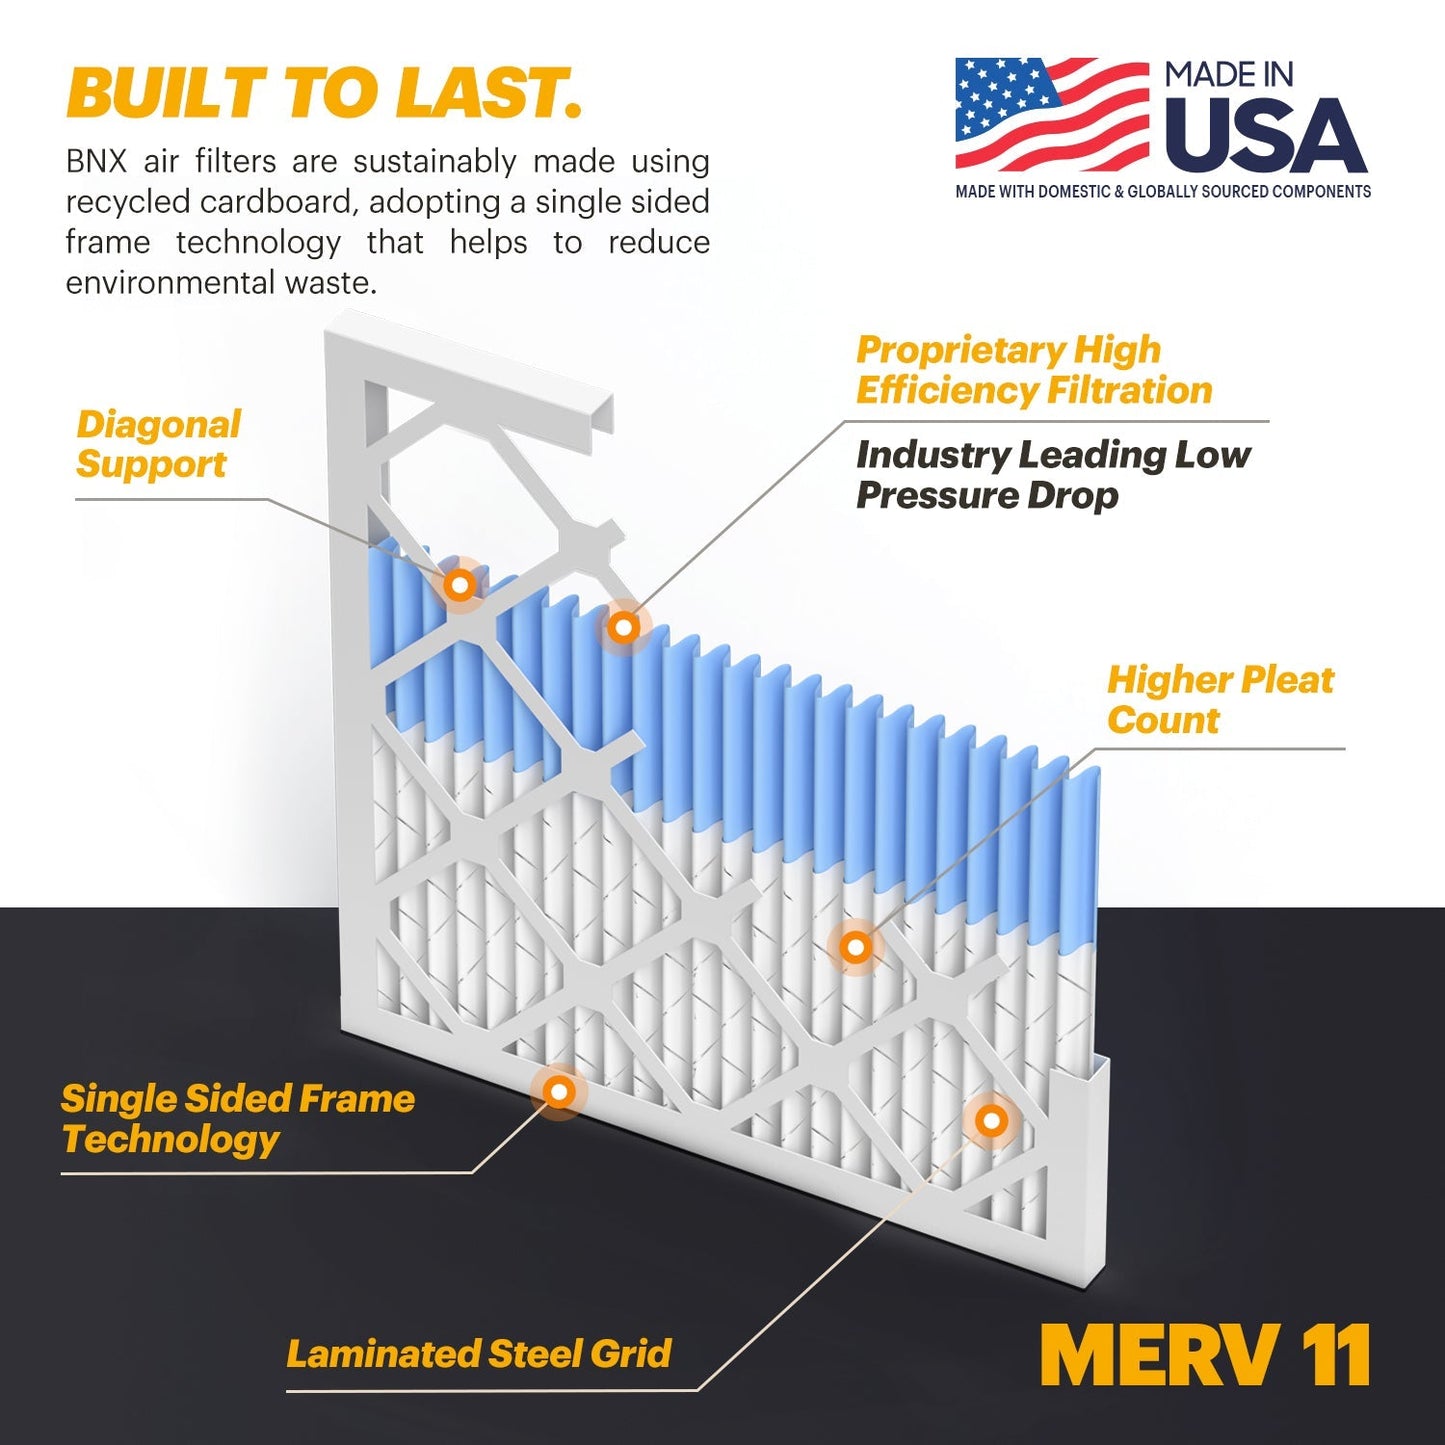 BNX 20x20x1 MERV 11 Air Filter 5 Pack - MADE IN USA - Electrostatic Pleated Air Conditioner HVAC AC Furnace Filters - Removes Dust, Mold, Pollen, Lint, Pet Dander, Smoke, Smog